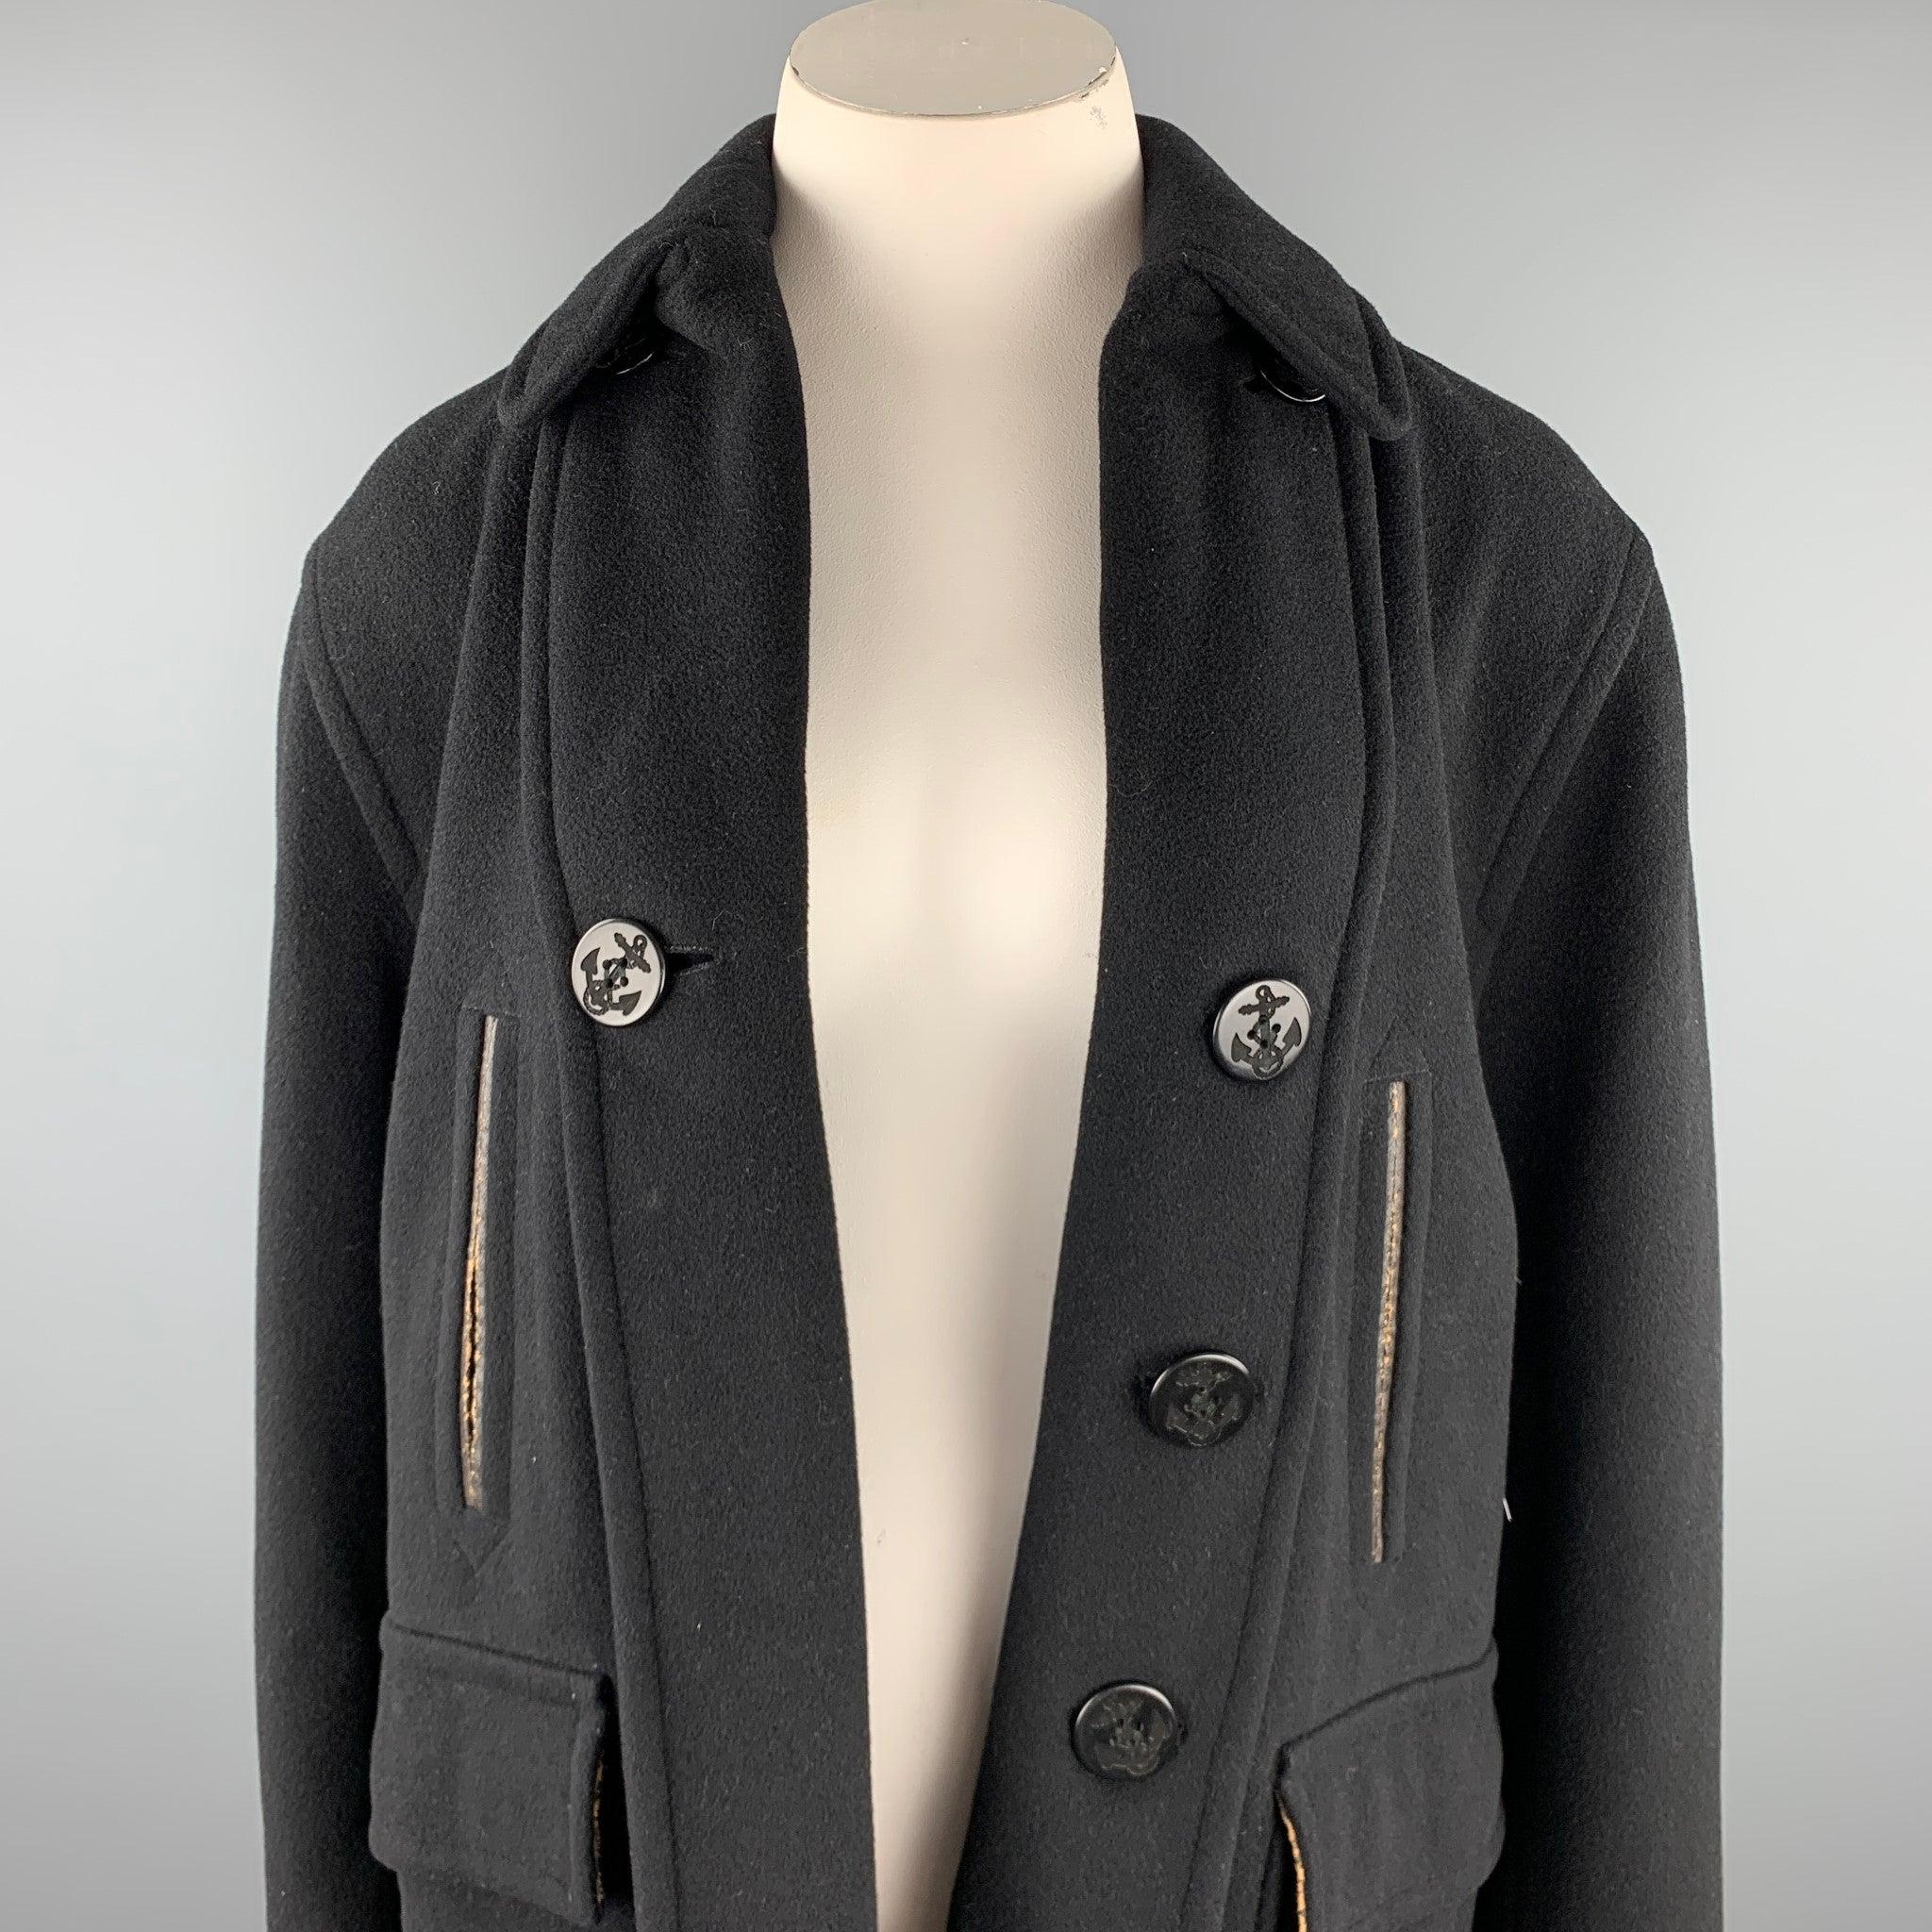 JEAN PAUL GAULTIER CLASSIQUE coat comes in a black wool blend with a full monogram print liner featuring a leather trim, patch pockets, button details, and a open front. Made in Italy.Good
Pre-Owned Condition. 

Marked:  I 44 / D 40 / F 40 / GB 12 /